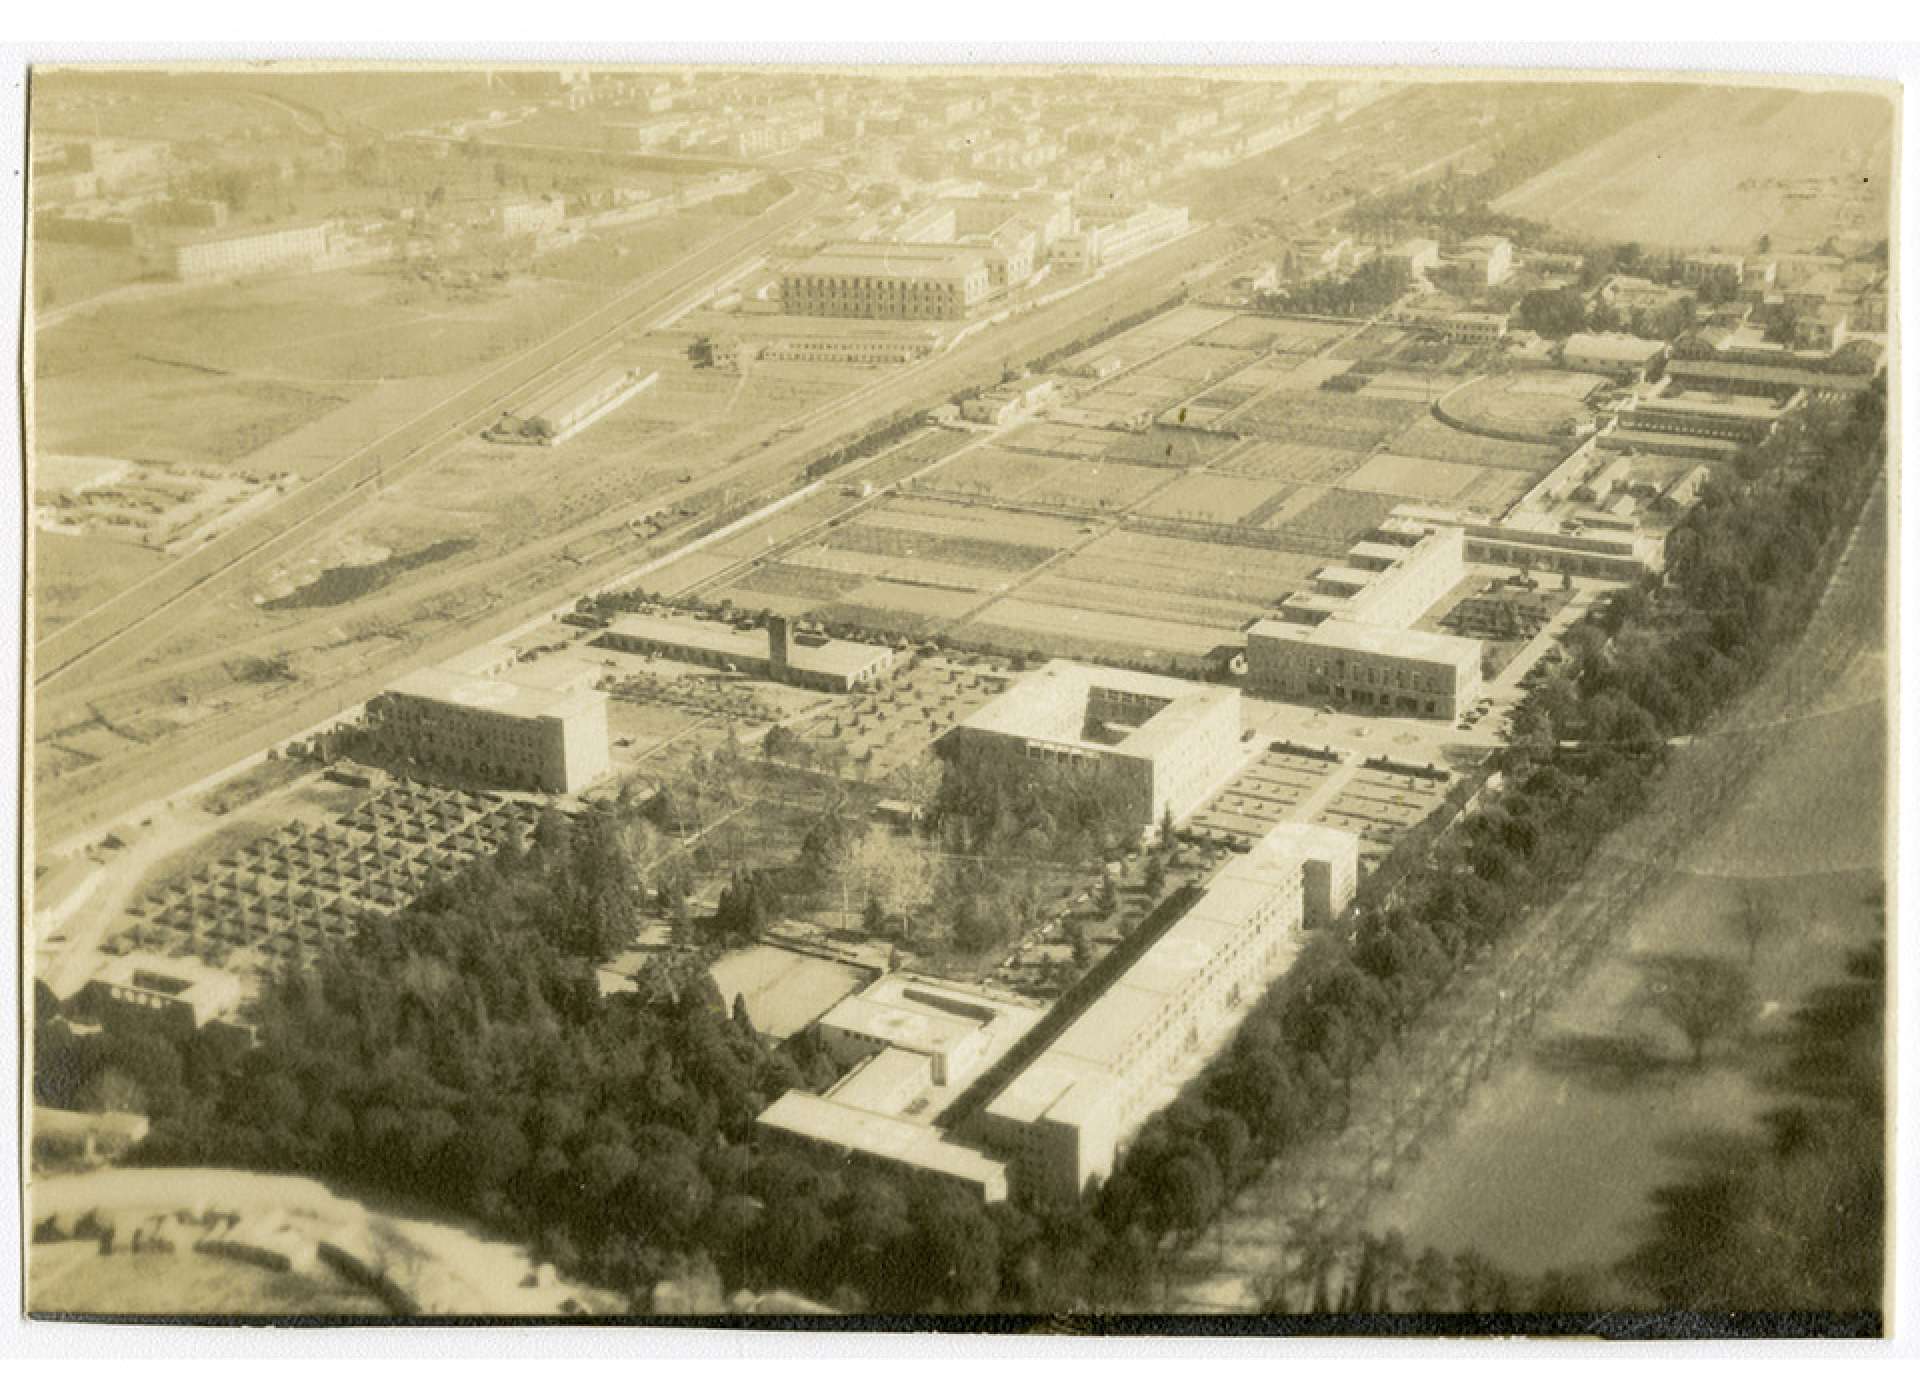 An aerial view of the former Mussolini School of Aviation, then serving as the 24th General Hospital in Florence, Italy. The National WWII Museum.